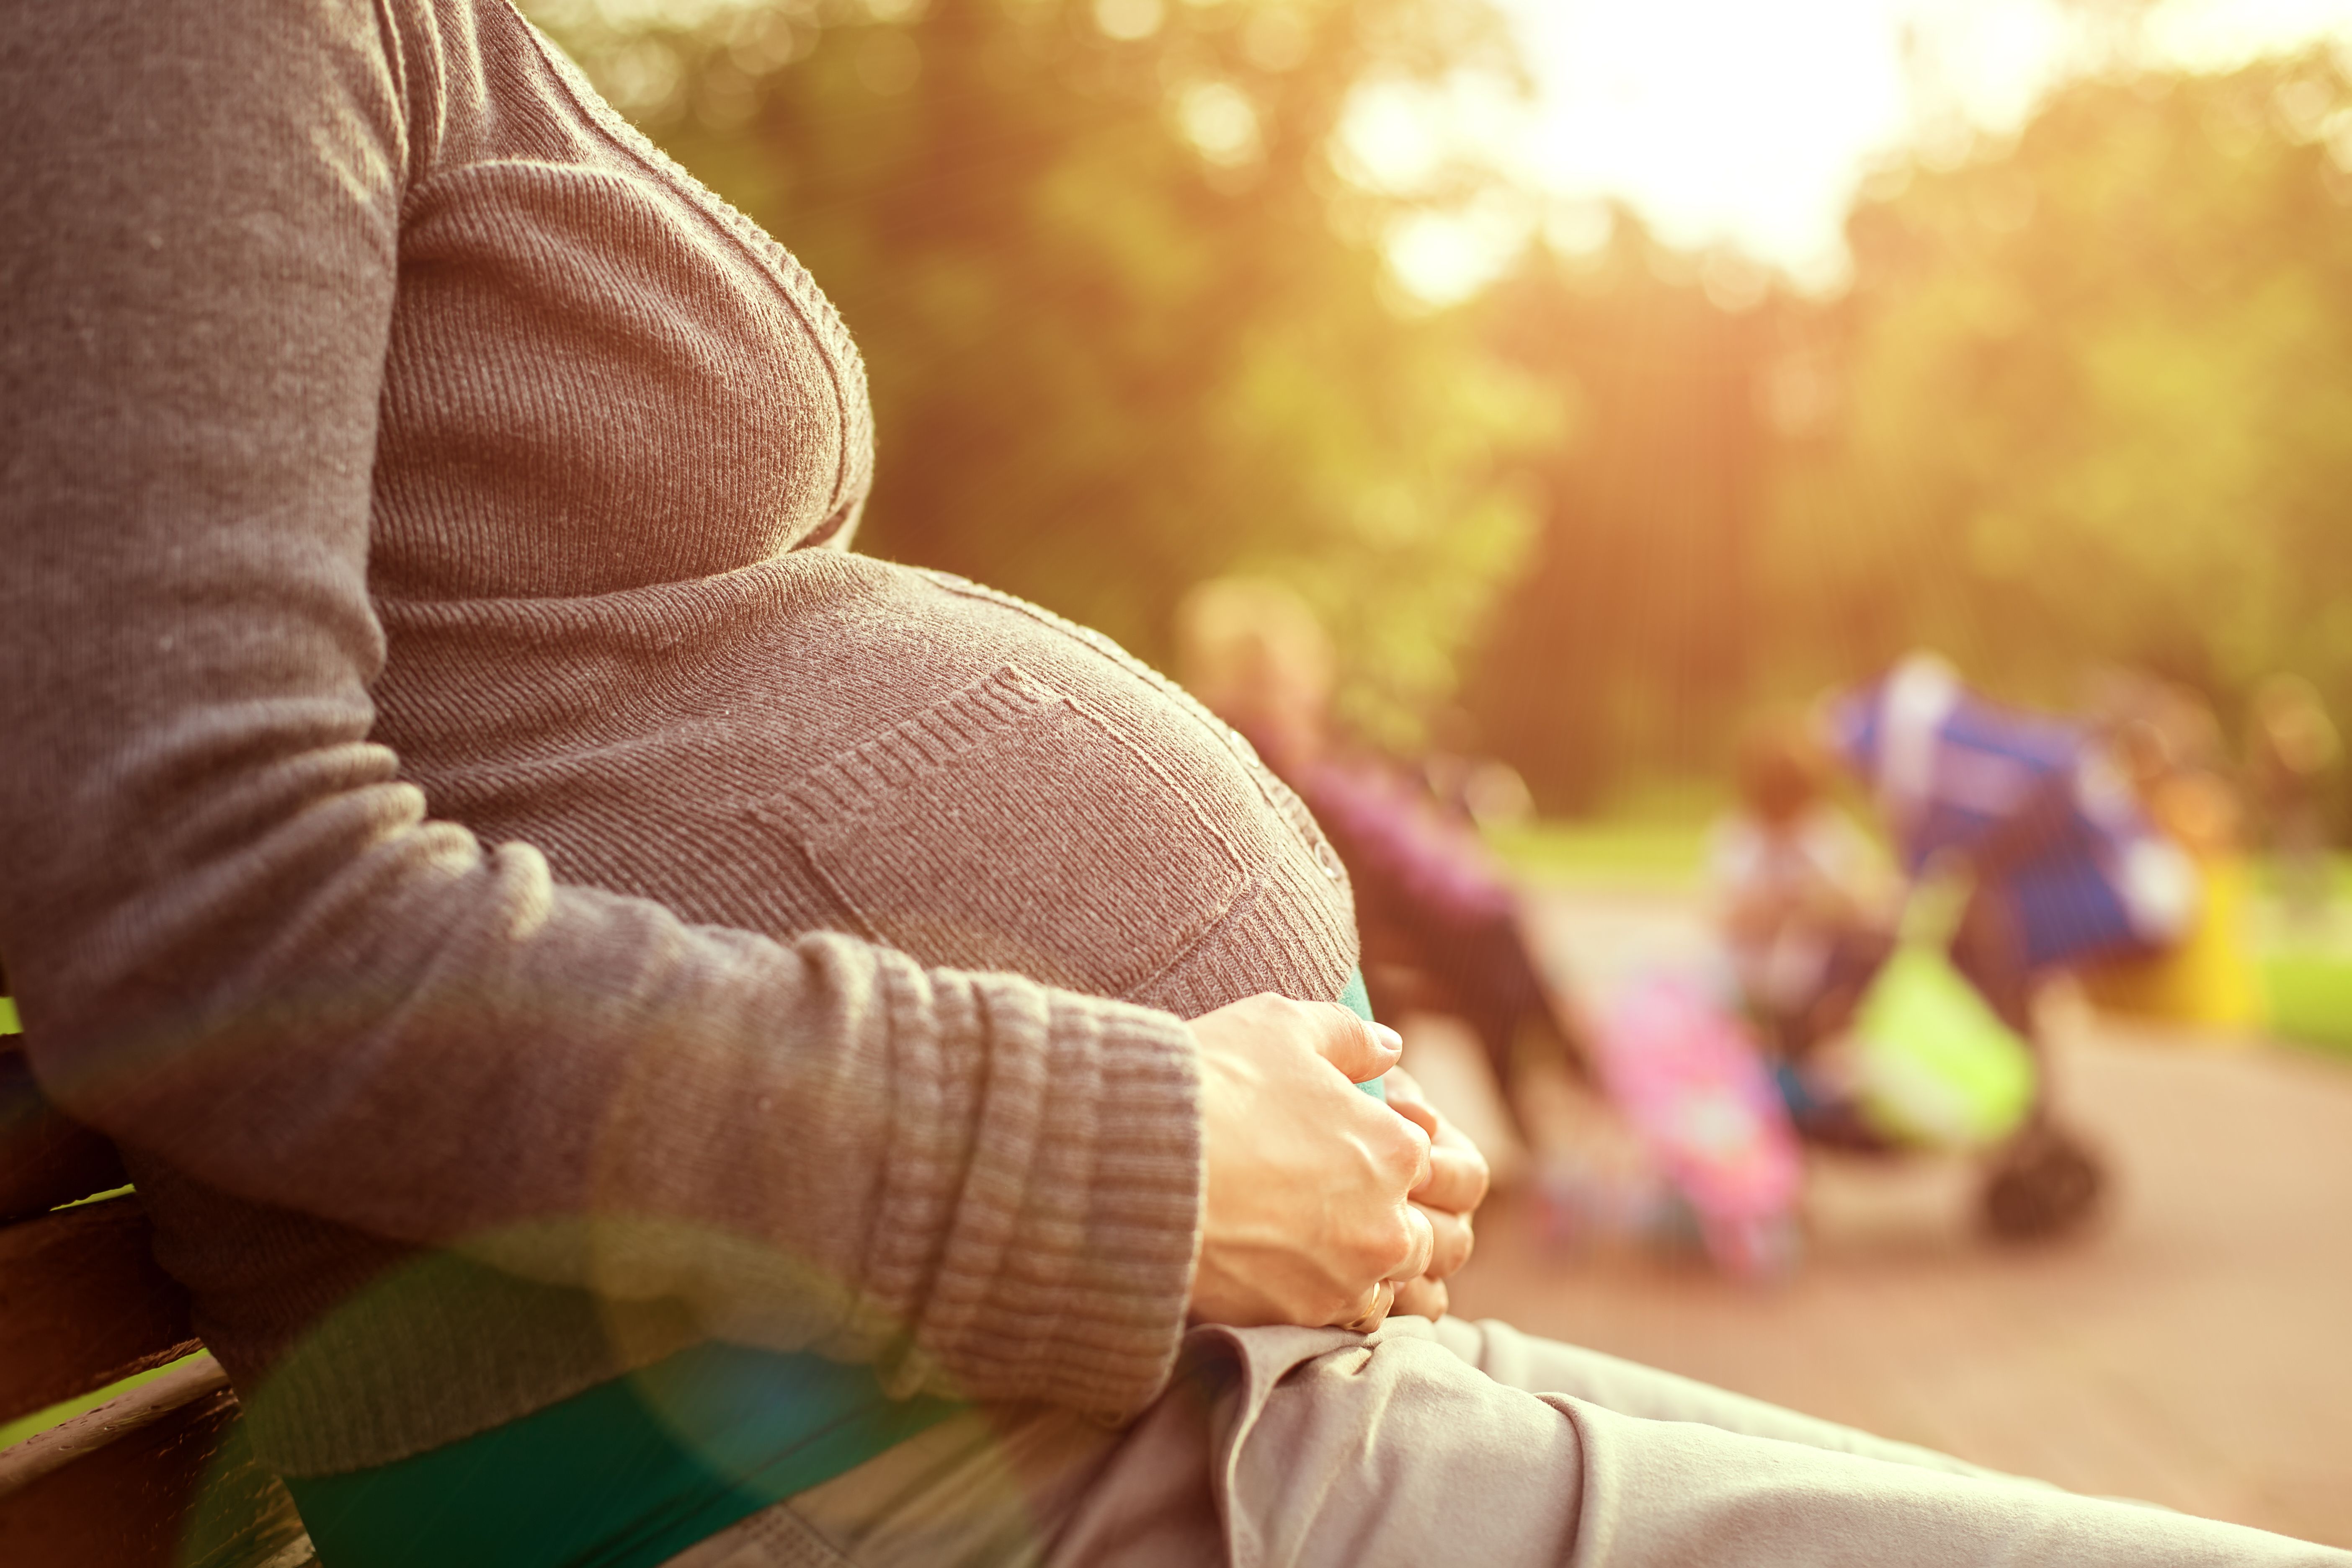 Pregnant woman holding belly while sitting on bench. | Photo: Shutterstock  